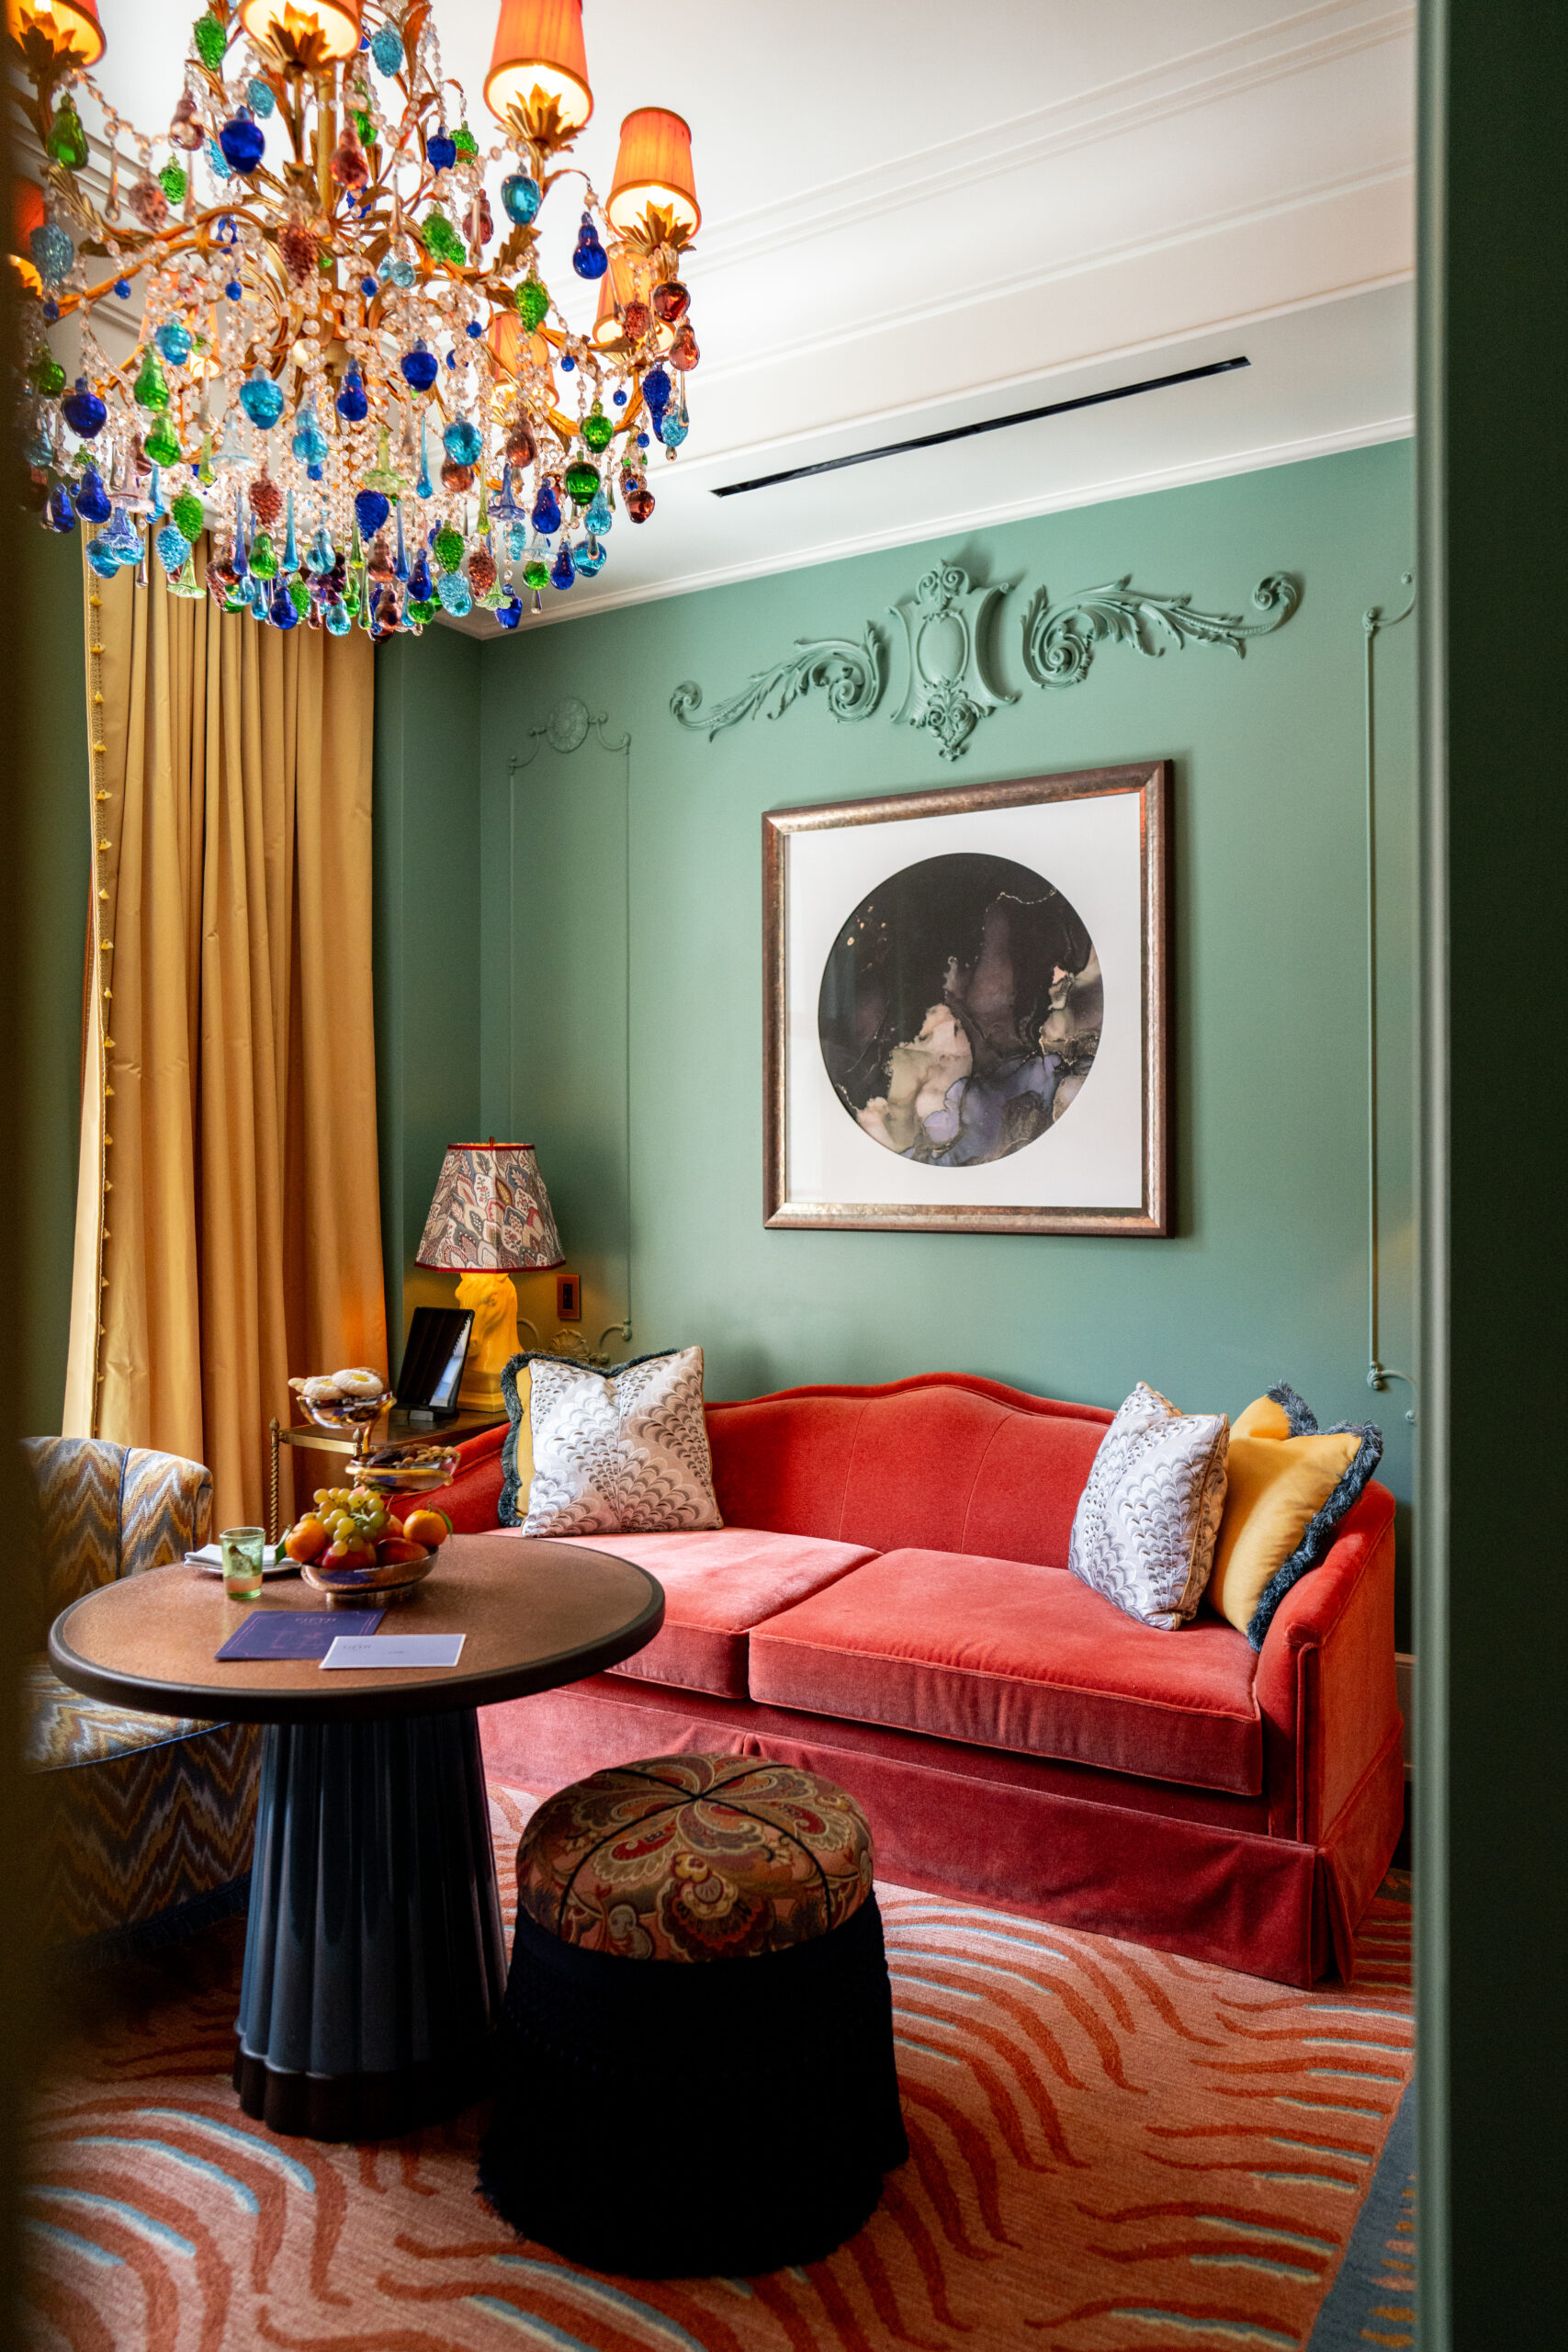 A well-arranged sofa set with a coffee table near the window and a colorful chandelier hanging above.